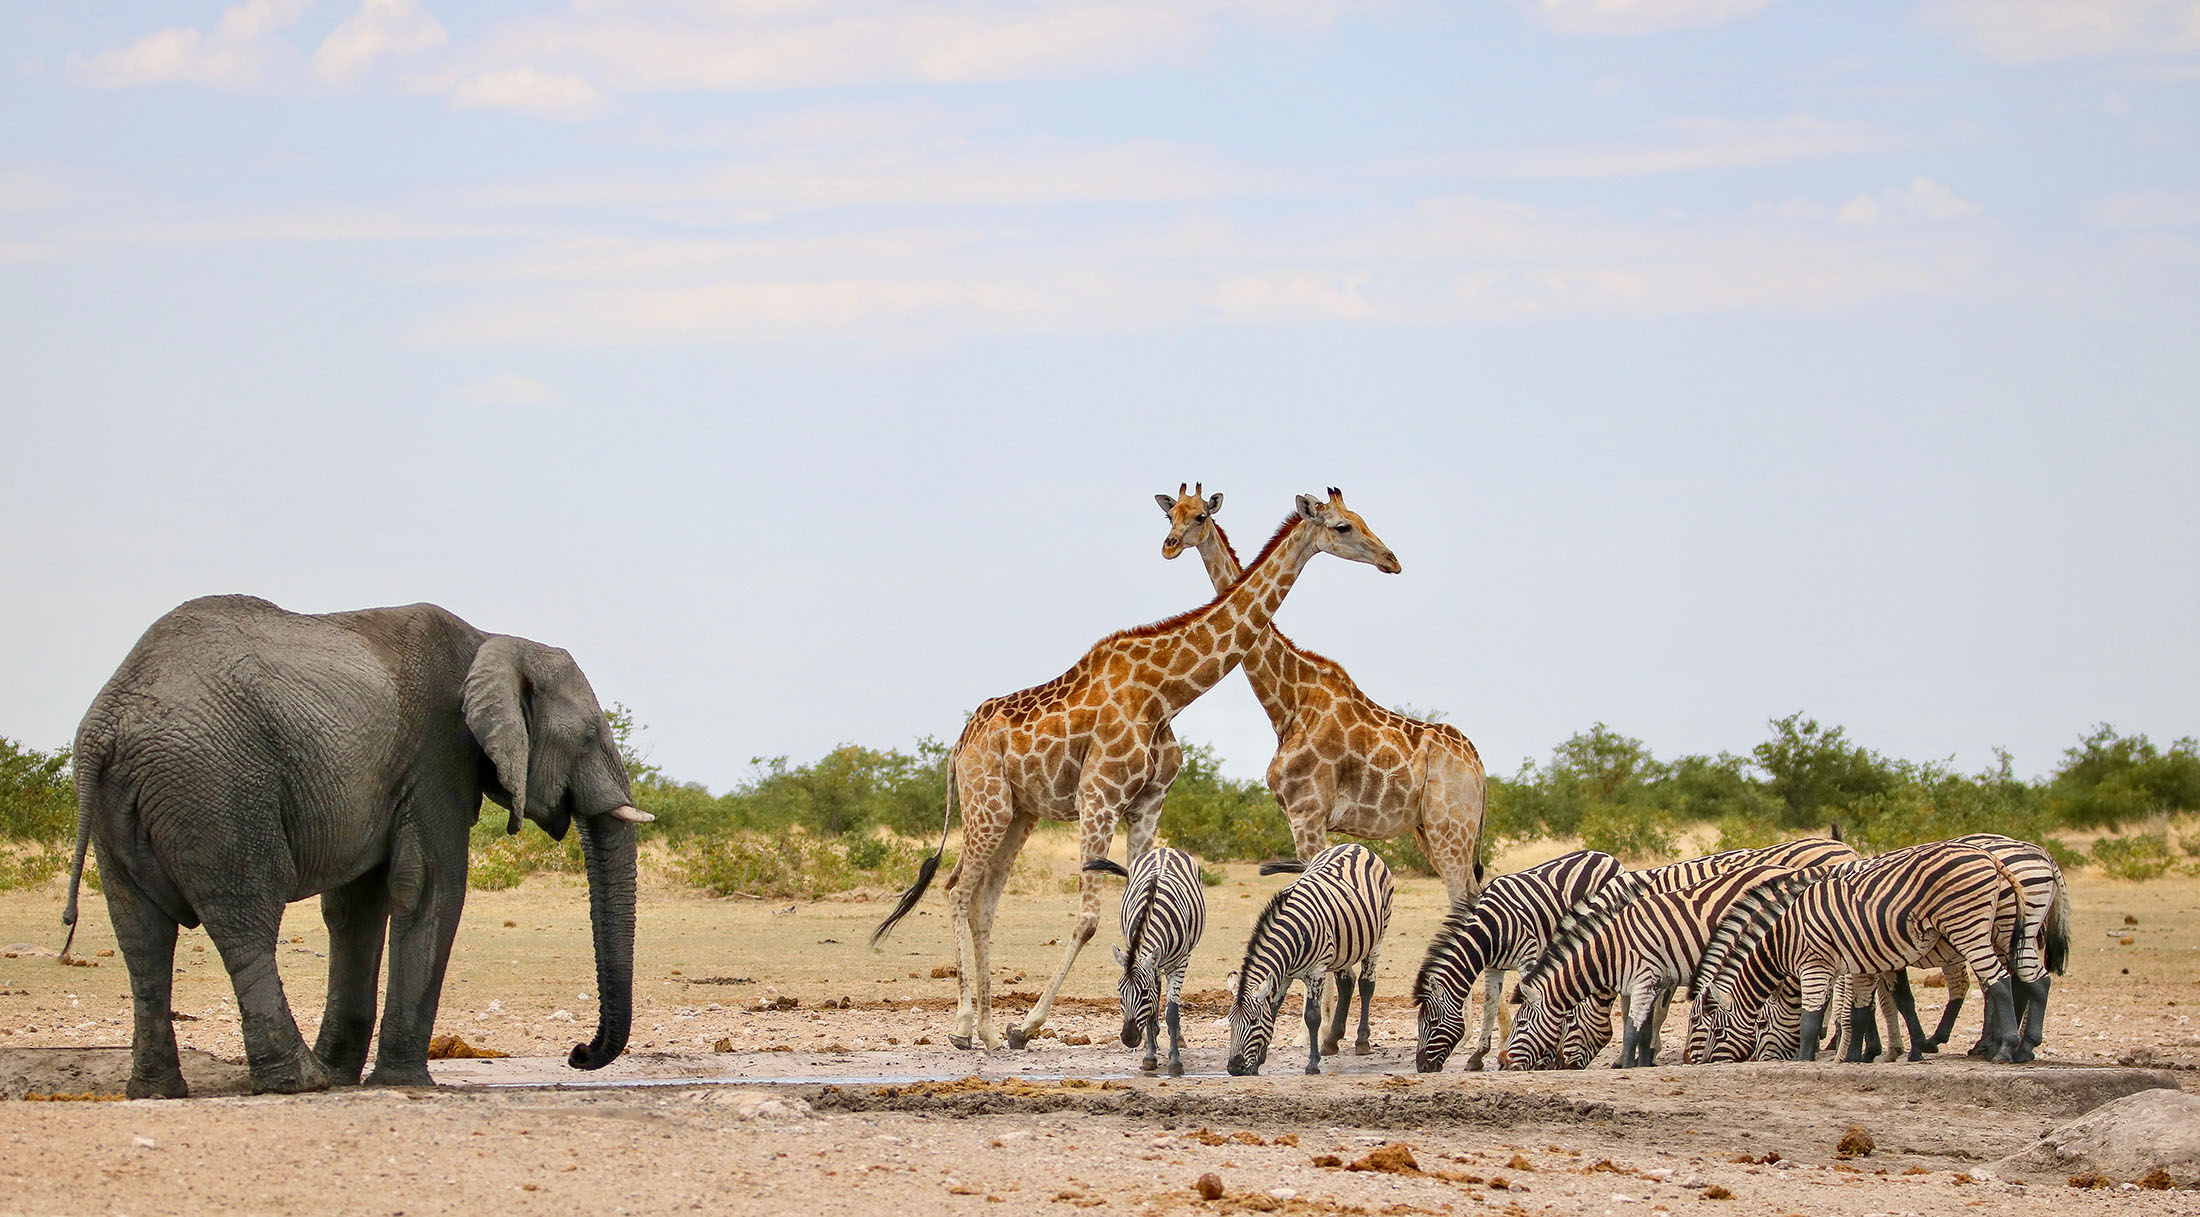 An elephant, two giraffes, and a group of zebras gather around a watering hole on a sandy area surrounded by low scrub bushes.